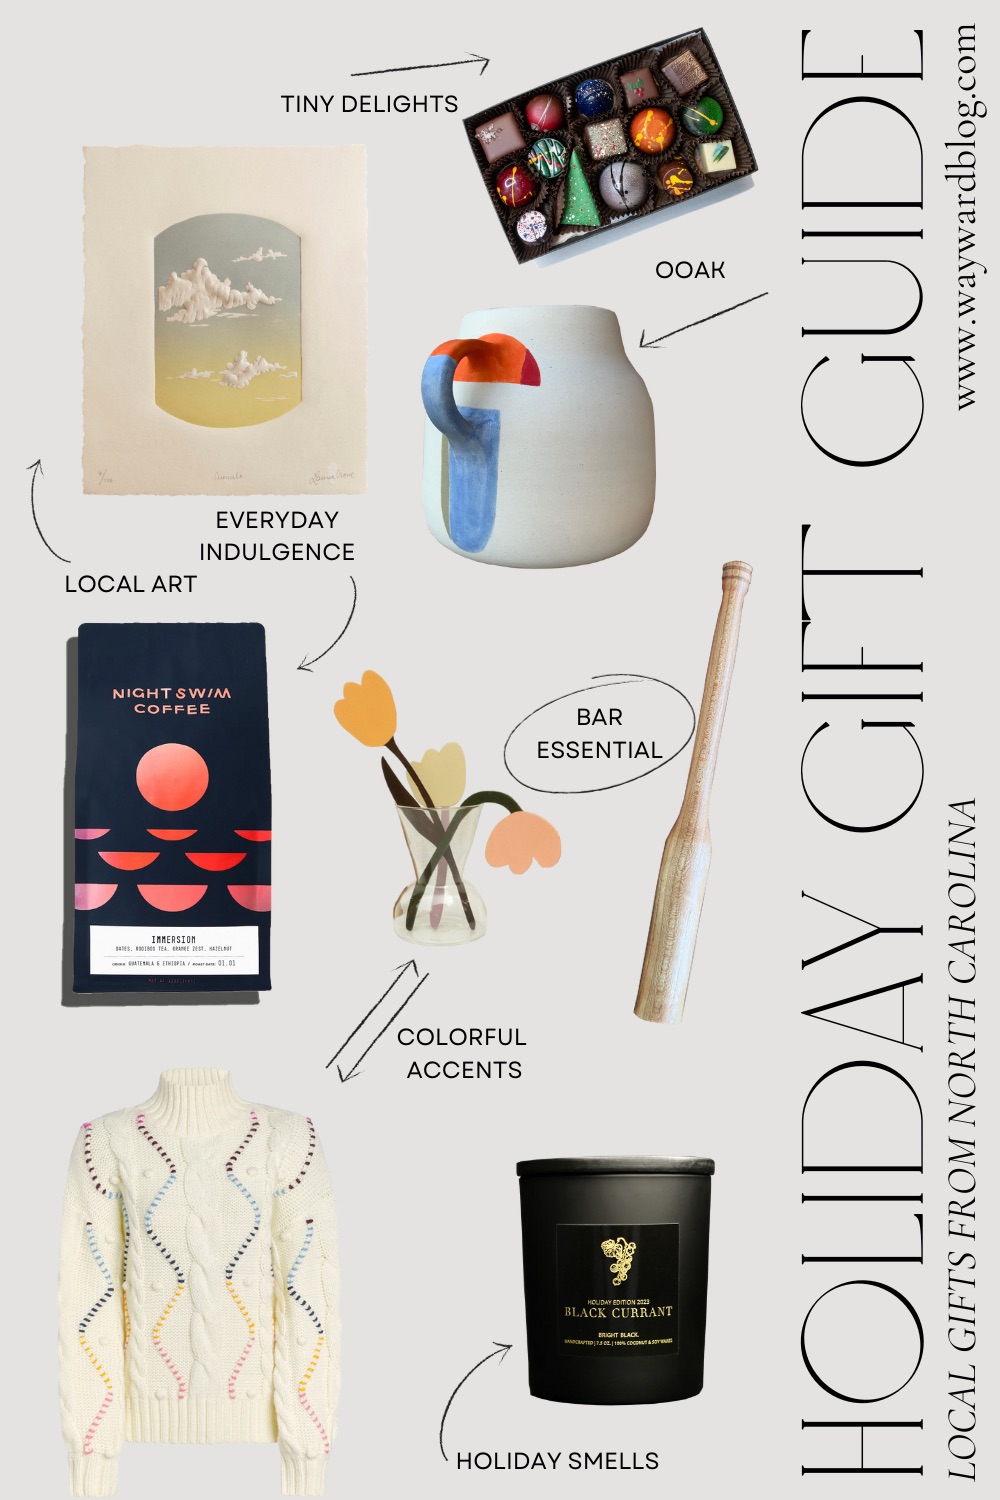 A collage of gifts from North Carolina makers